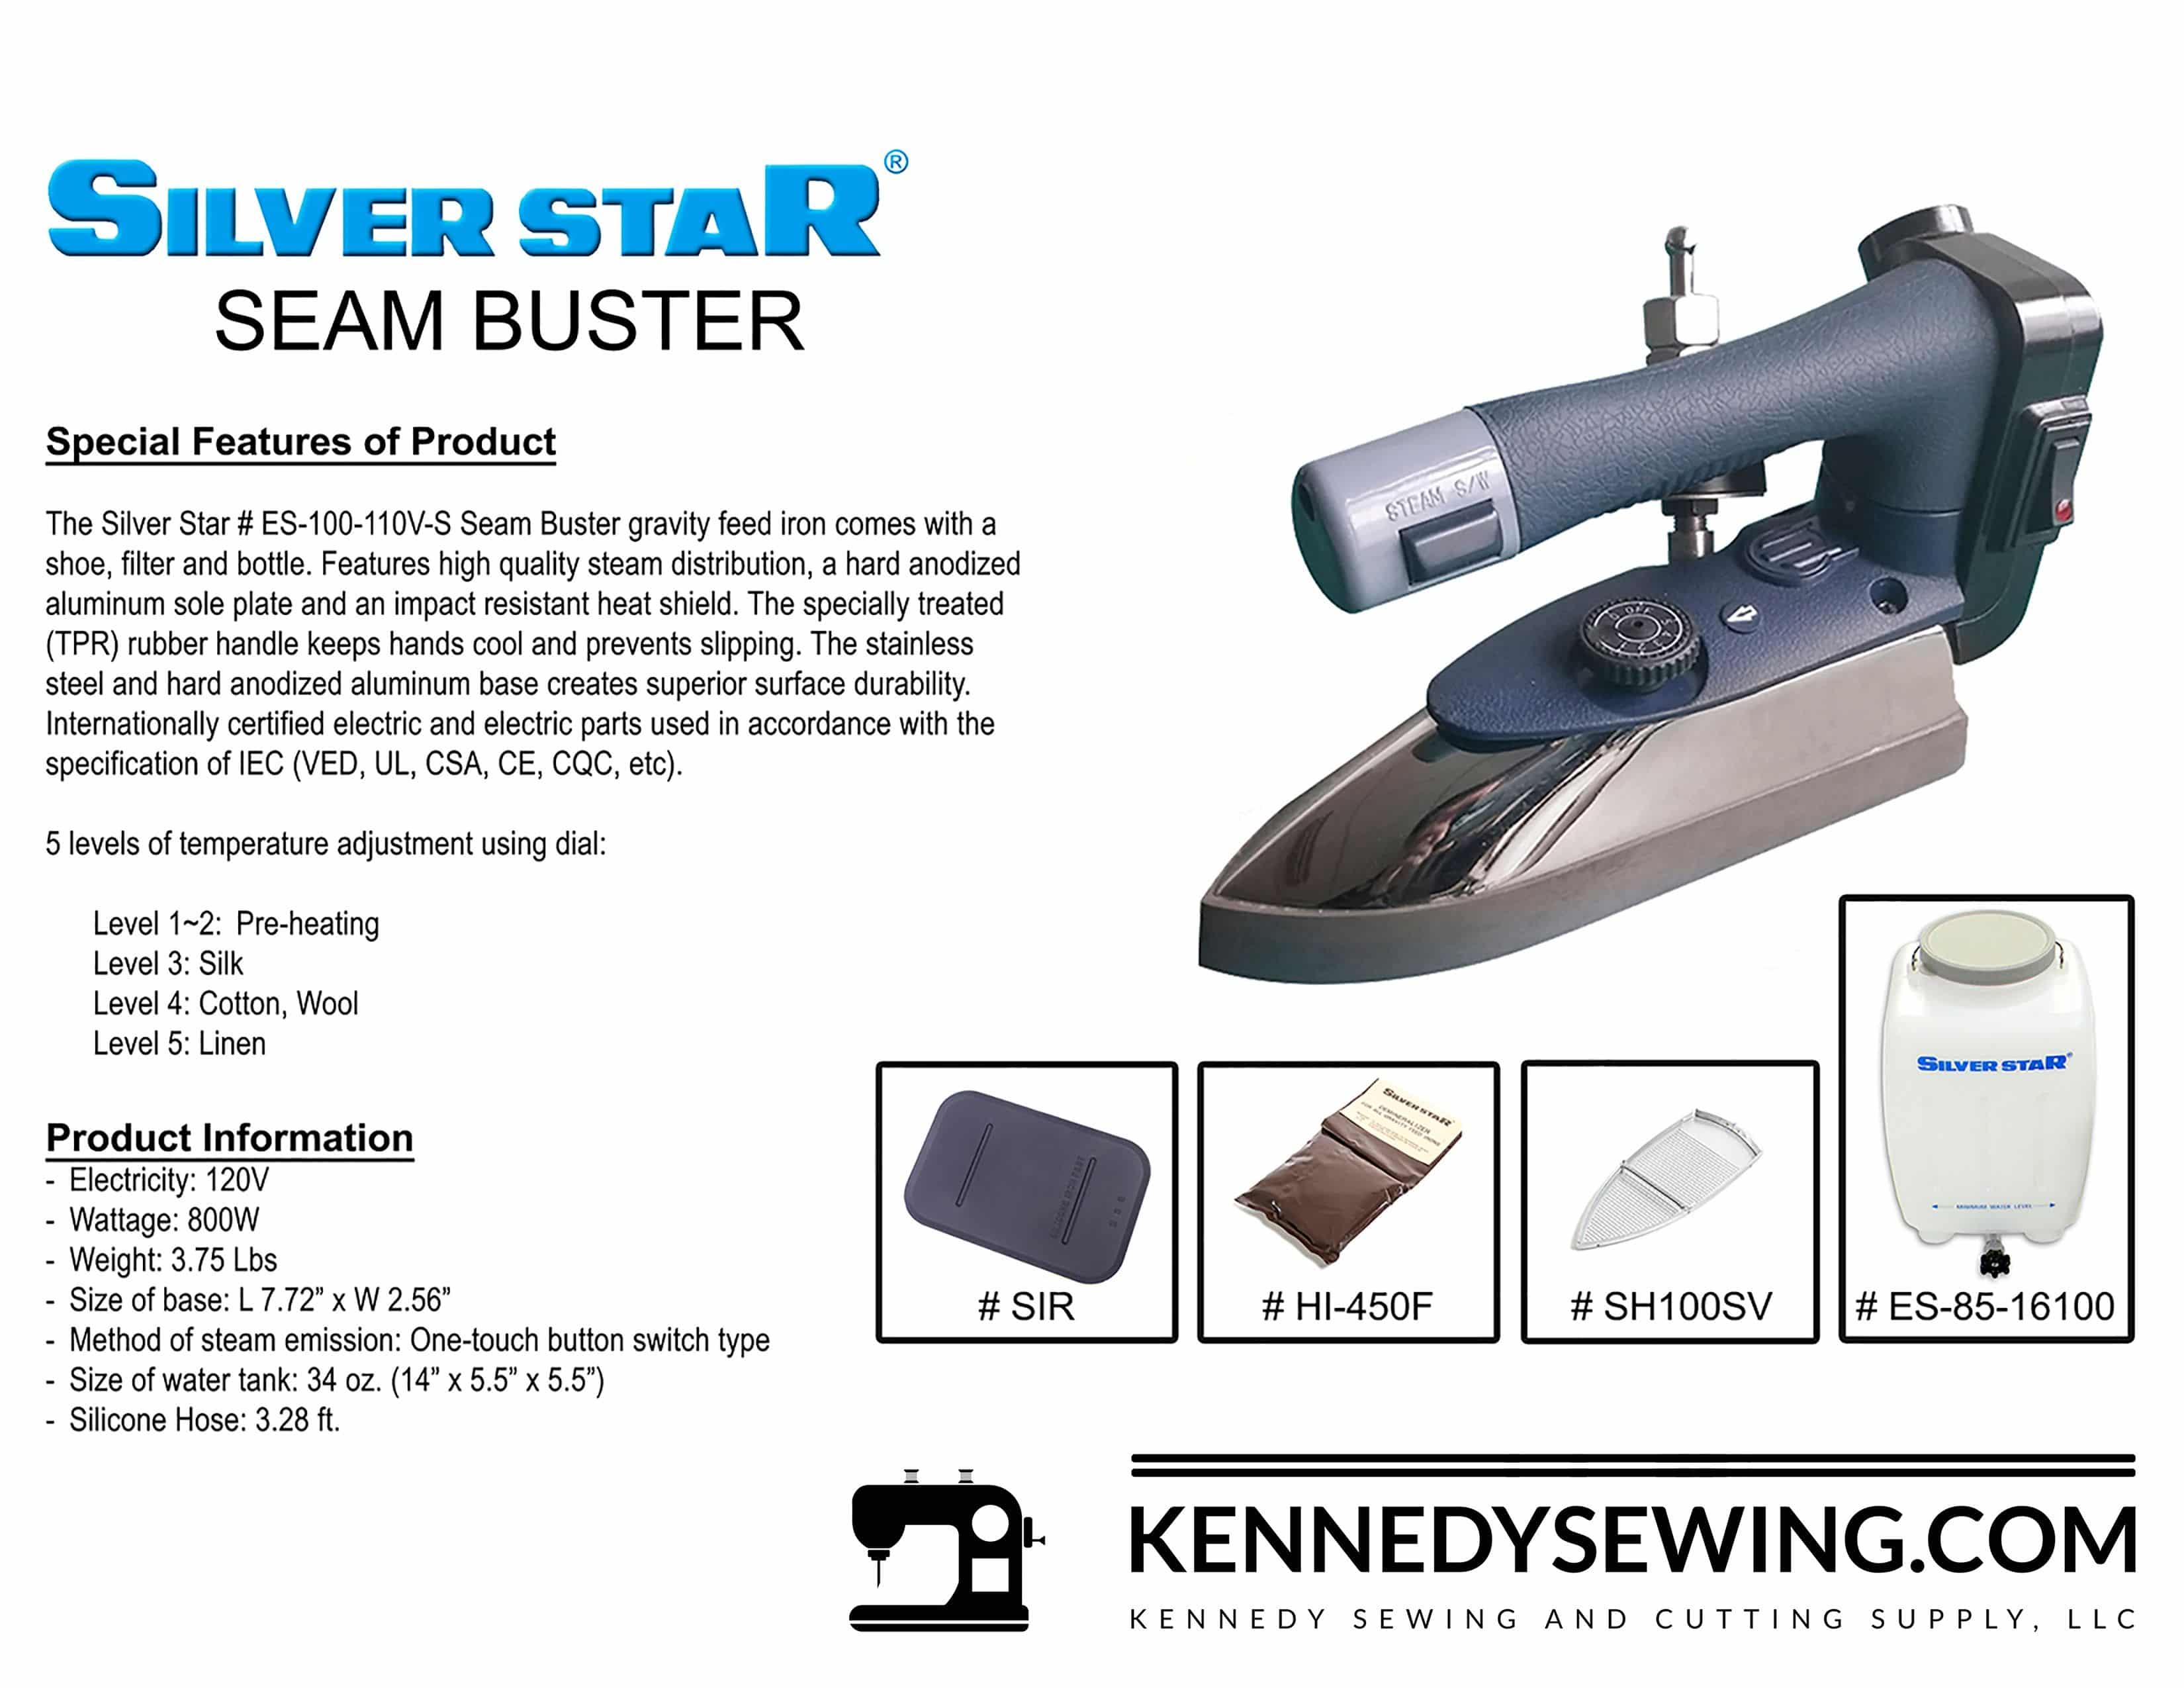 SILVER STAR 
Model: ES-100-110V-S 
IRON WITH GRAVITY DRIP
PRESSING and FINISHING EQUIPMENT
110 VOLTS